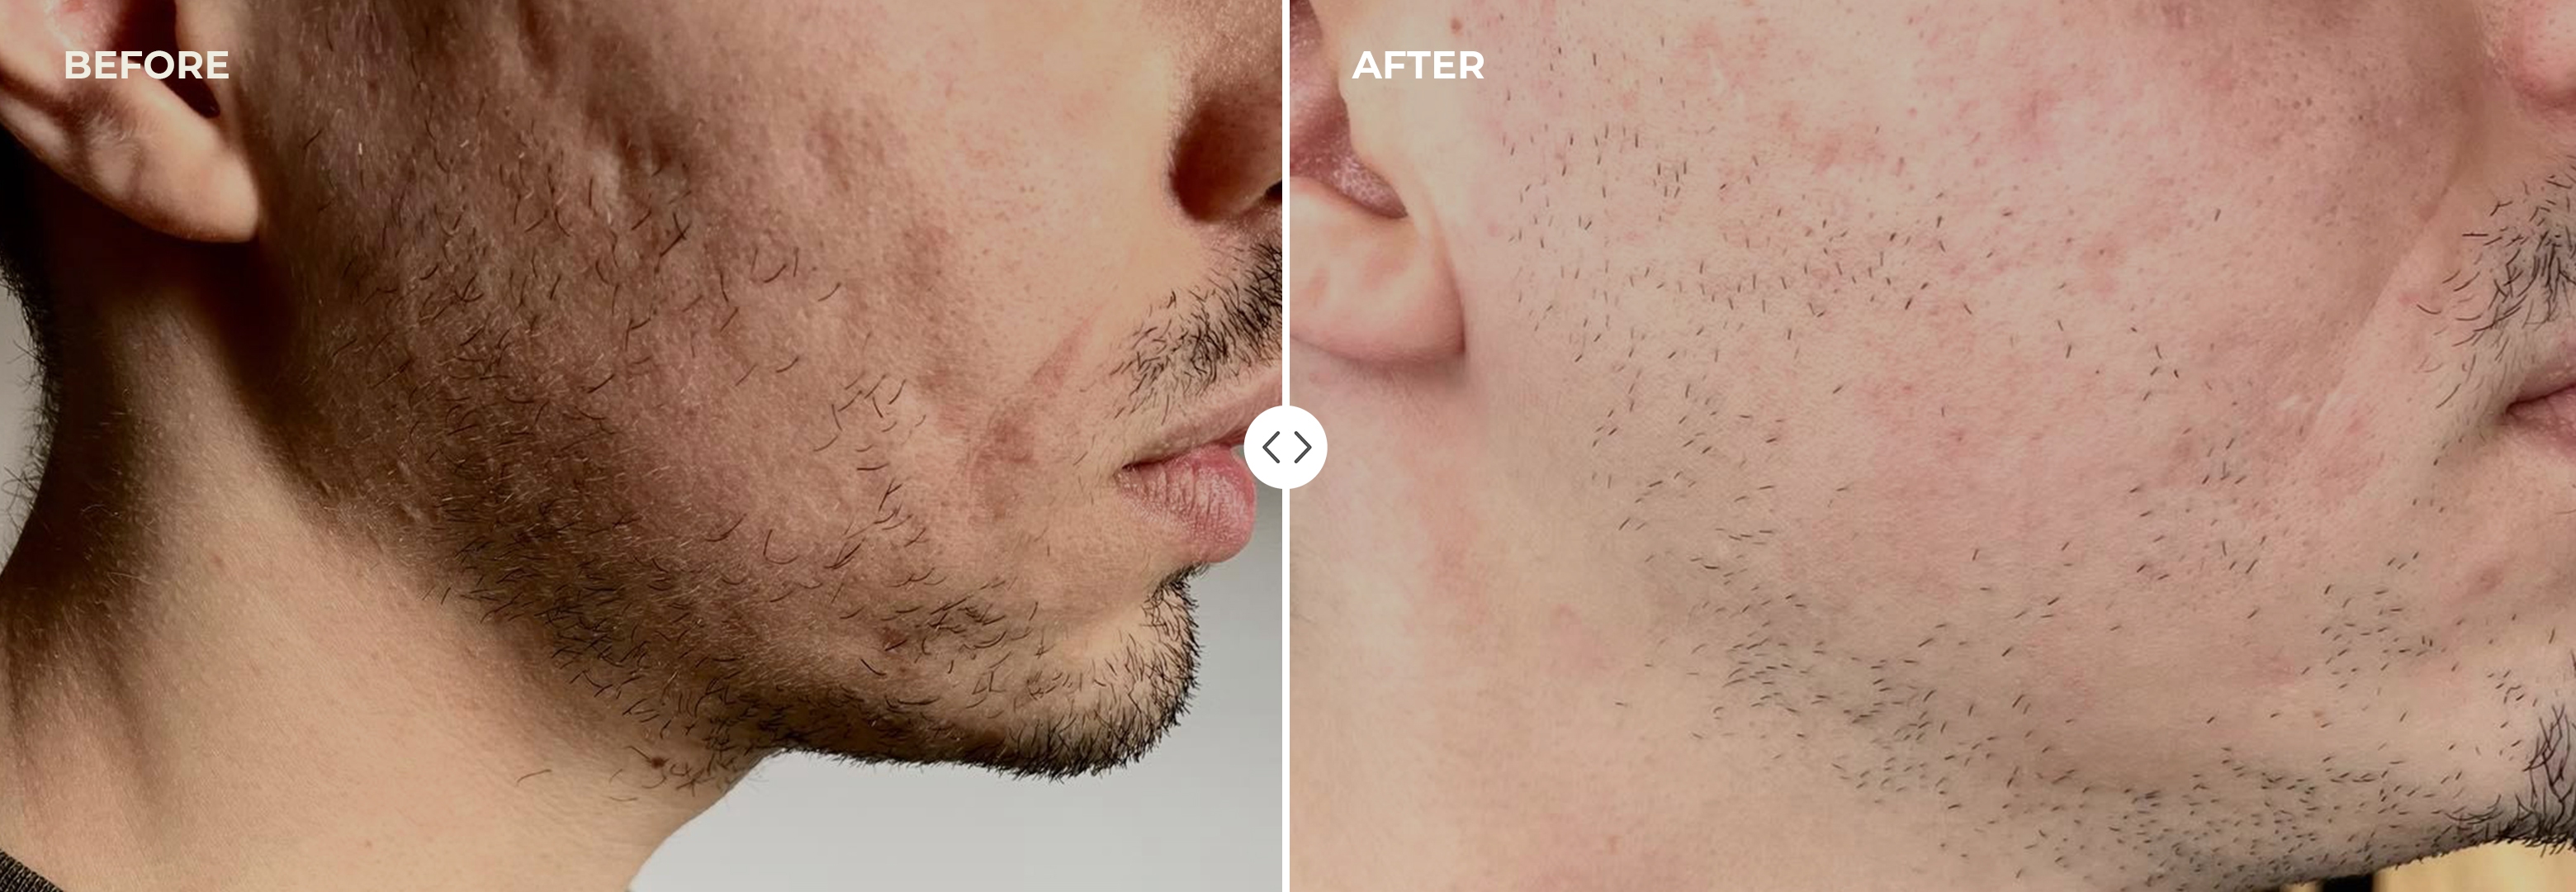 Before and After laser treatment of acne scar